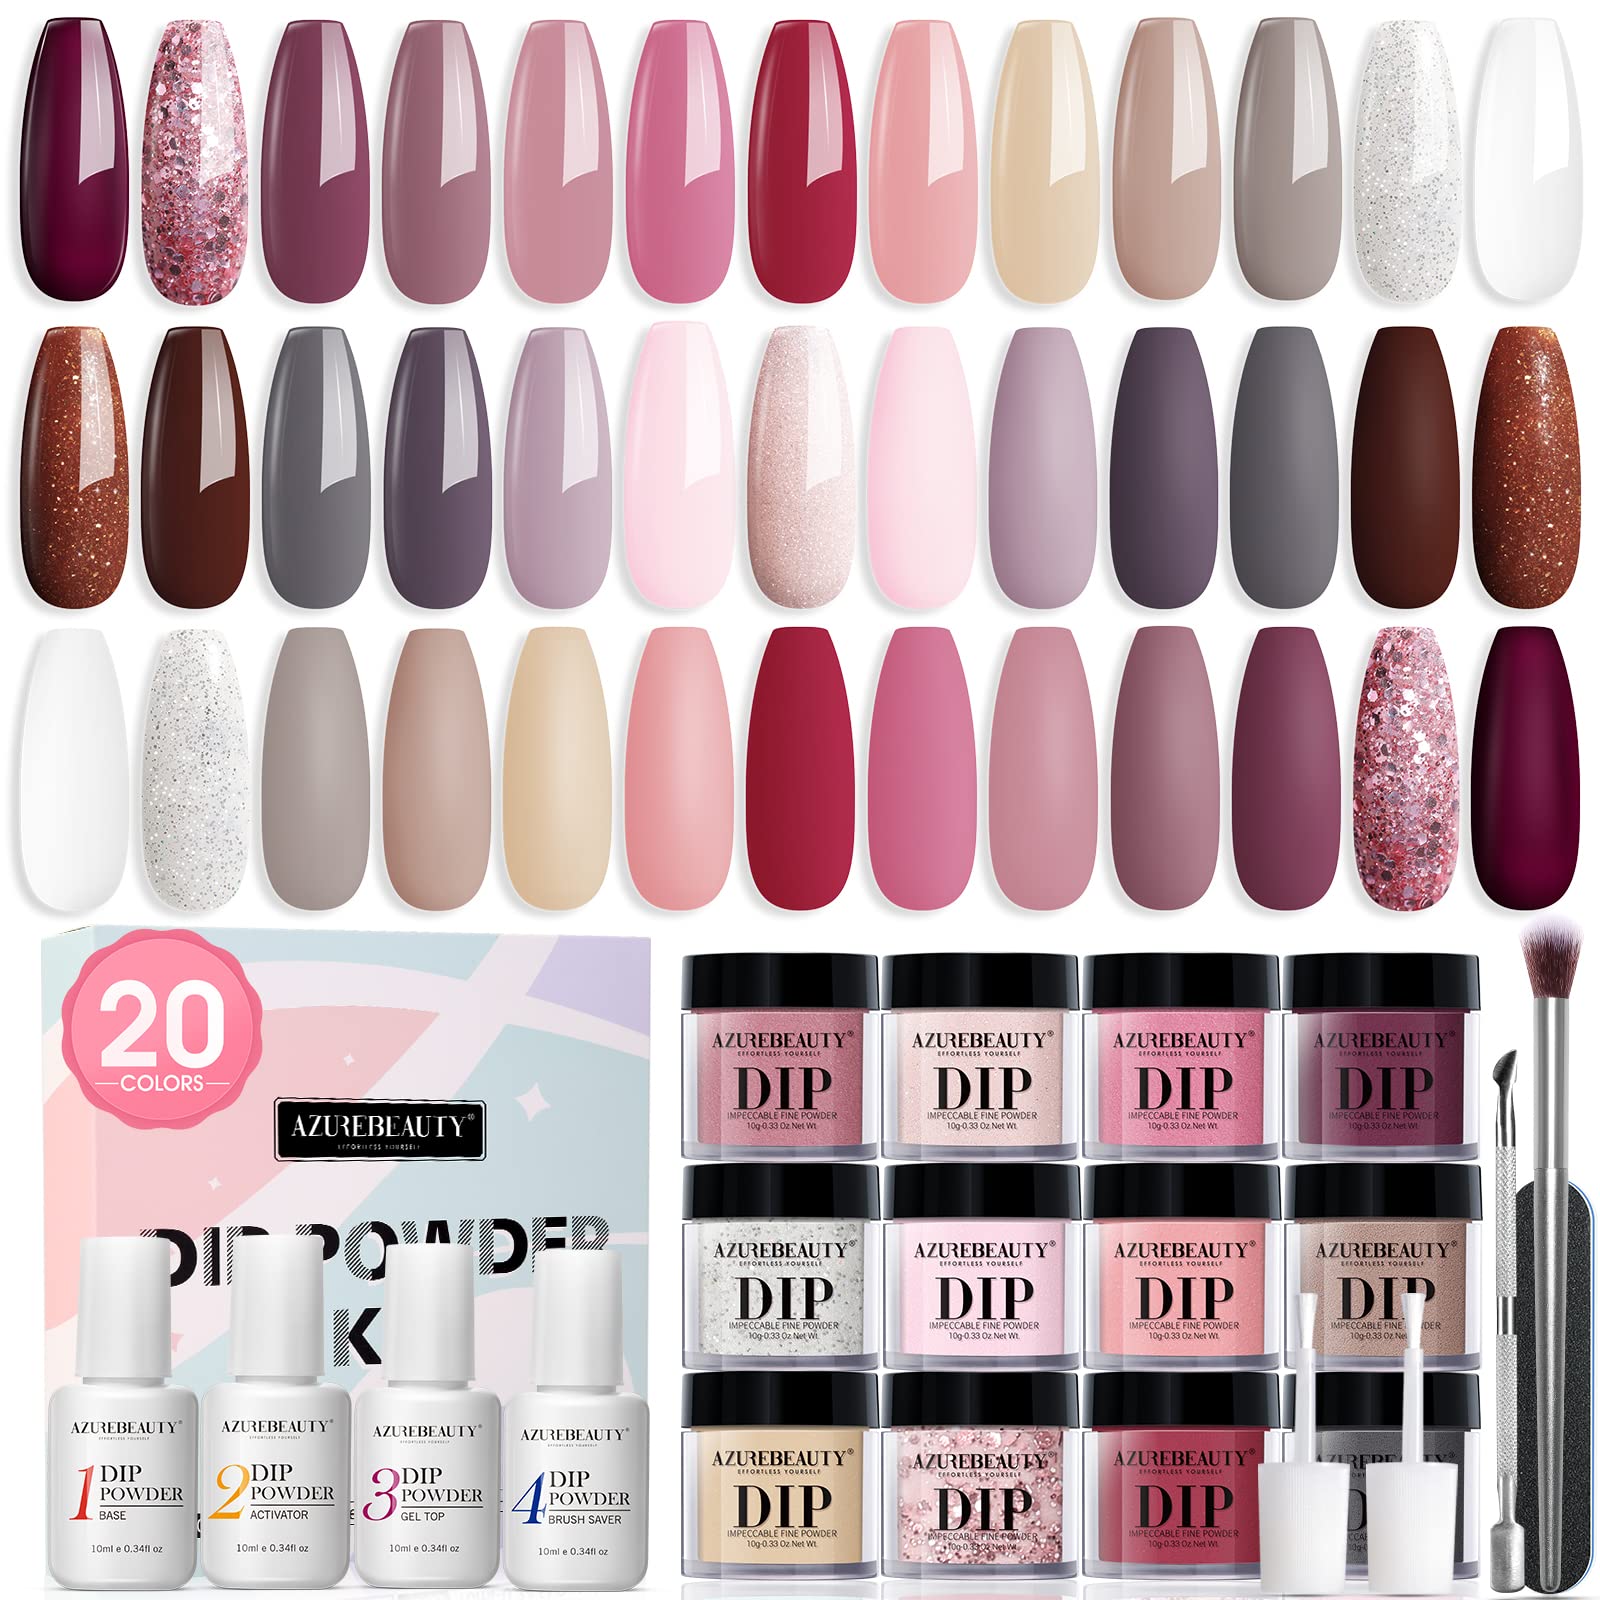 AZUREBEAUTY 29 Pcs Dip Powder Nail Kit Starter, All Season 20 Colors Clear Nude Light/Hot Pink Acrylic Dipping Powder Essential Liquid Set with Top/Base Coat for French Nail Art Manicure DIY Salon Women